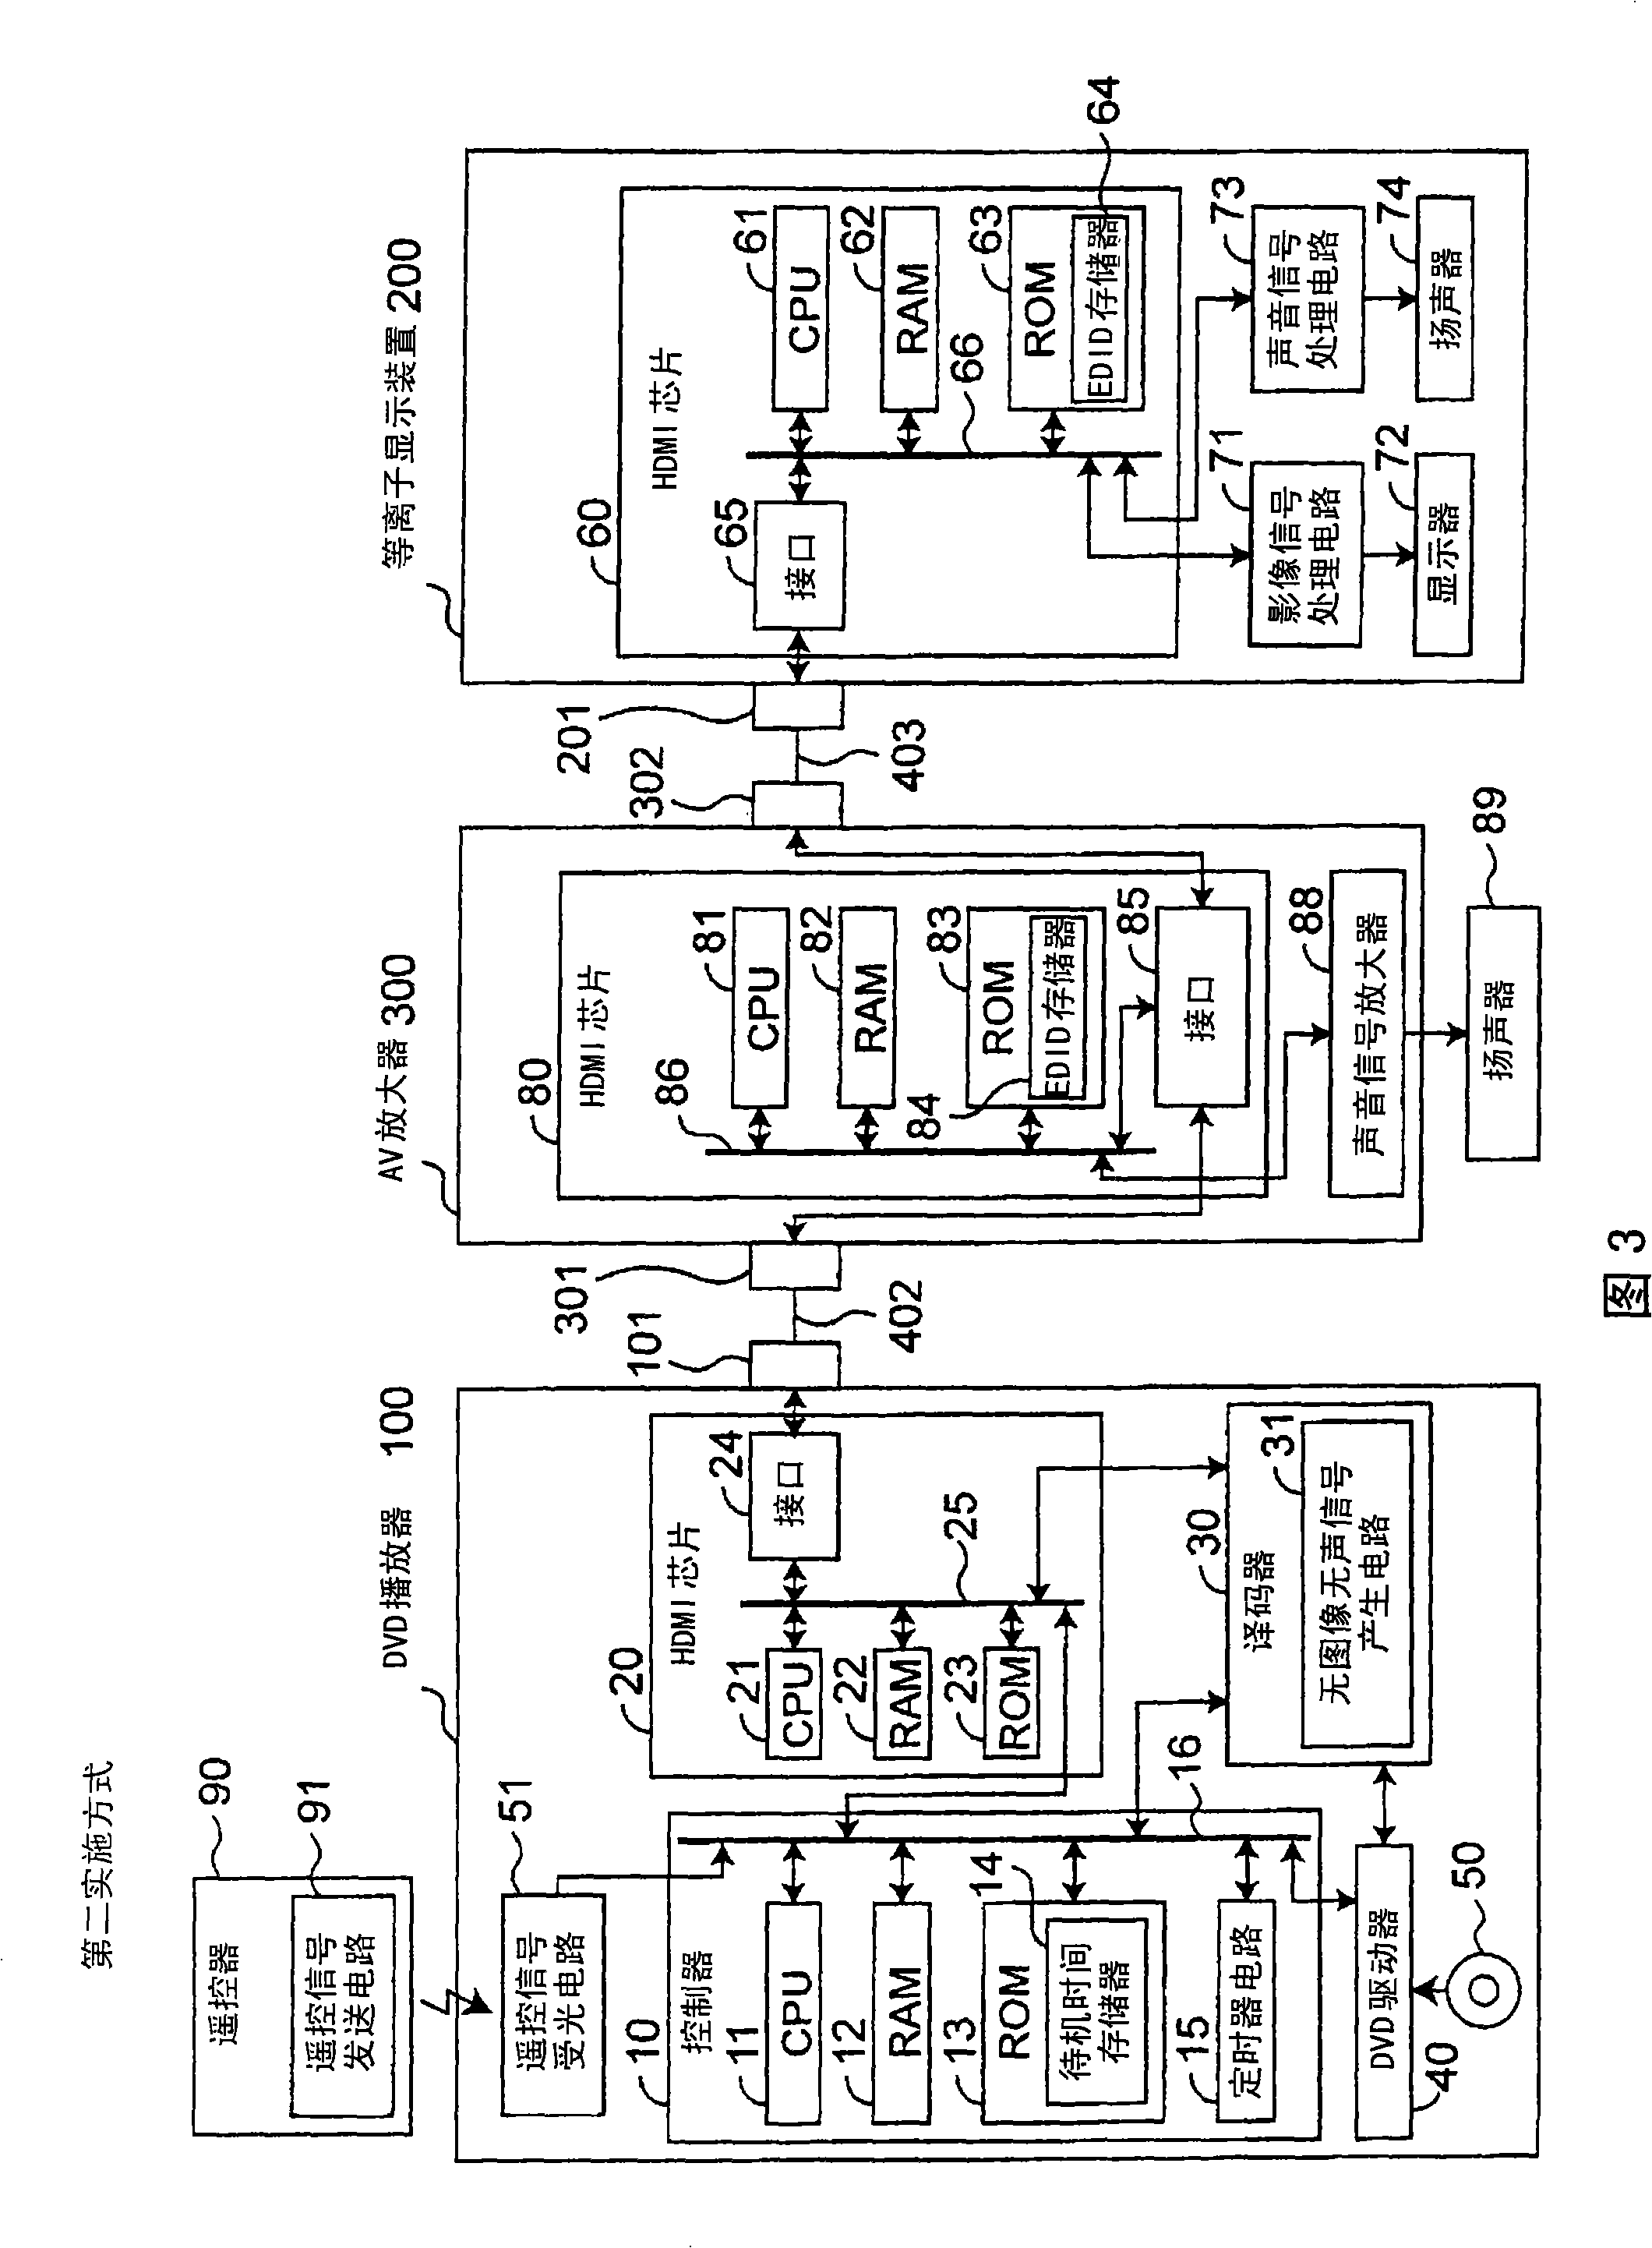 Signal source device